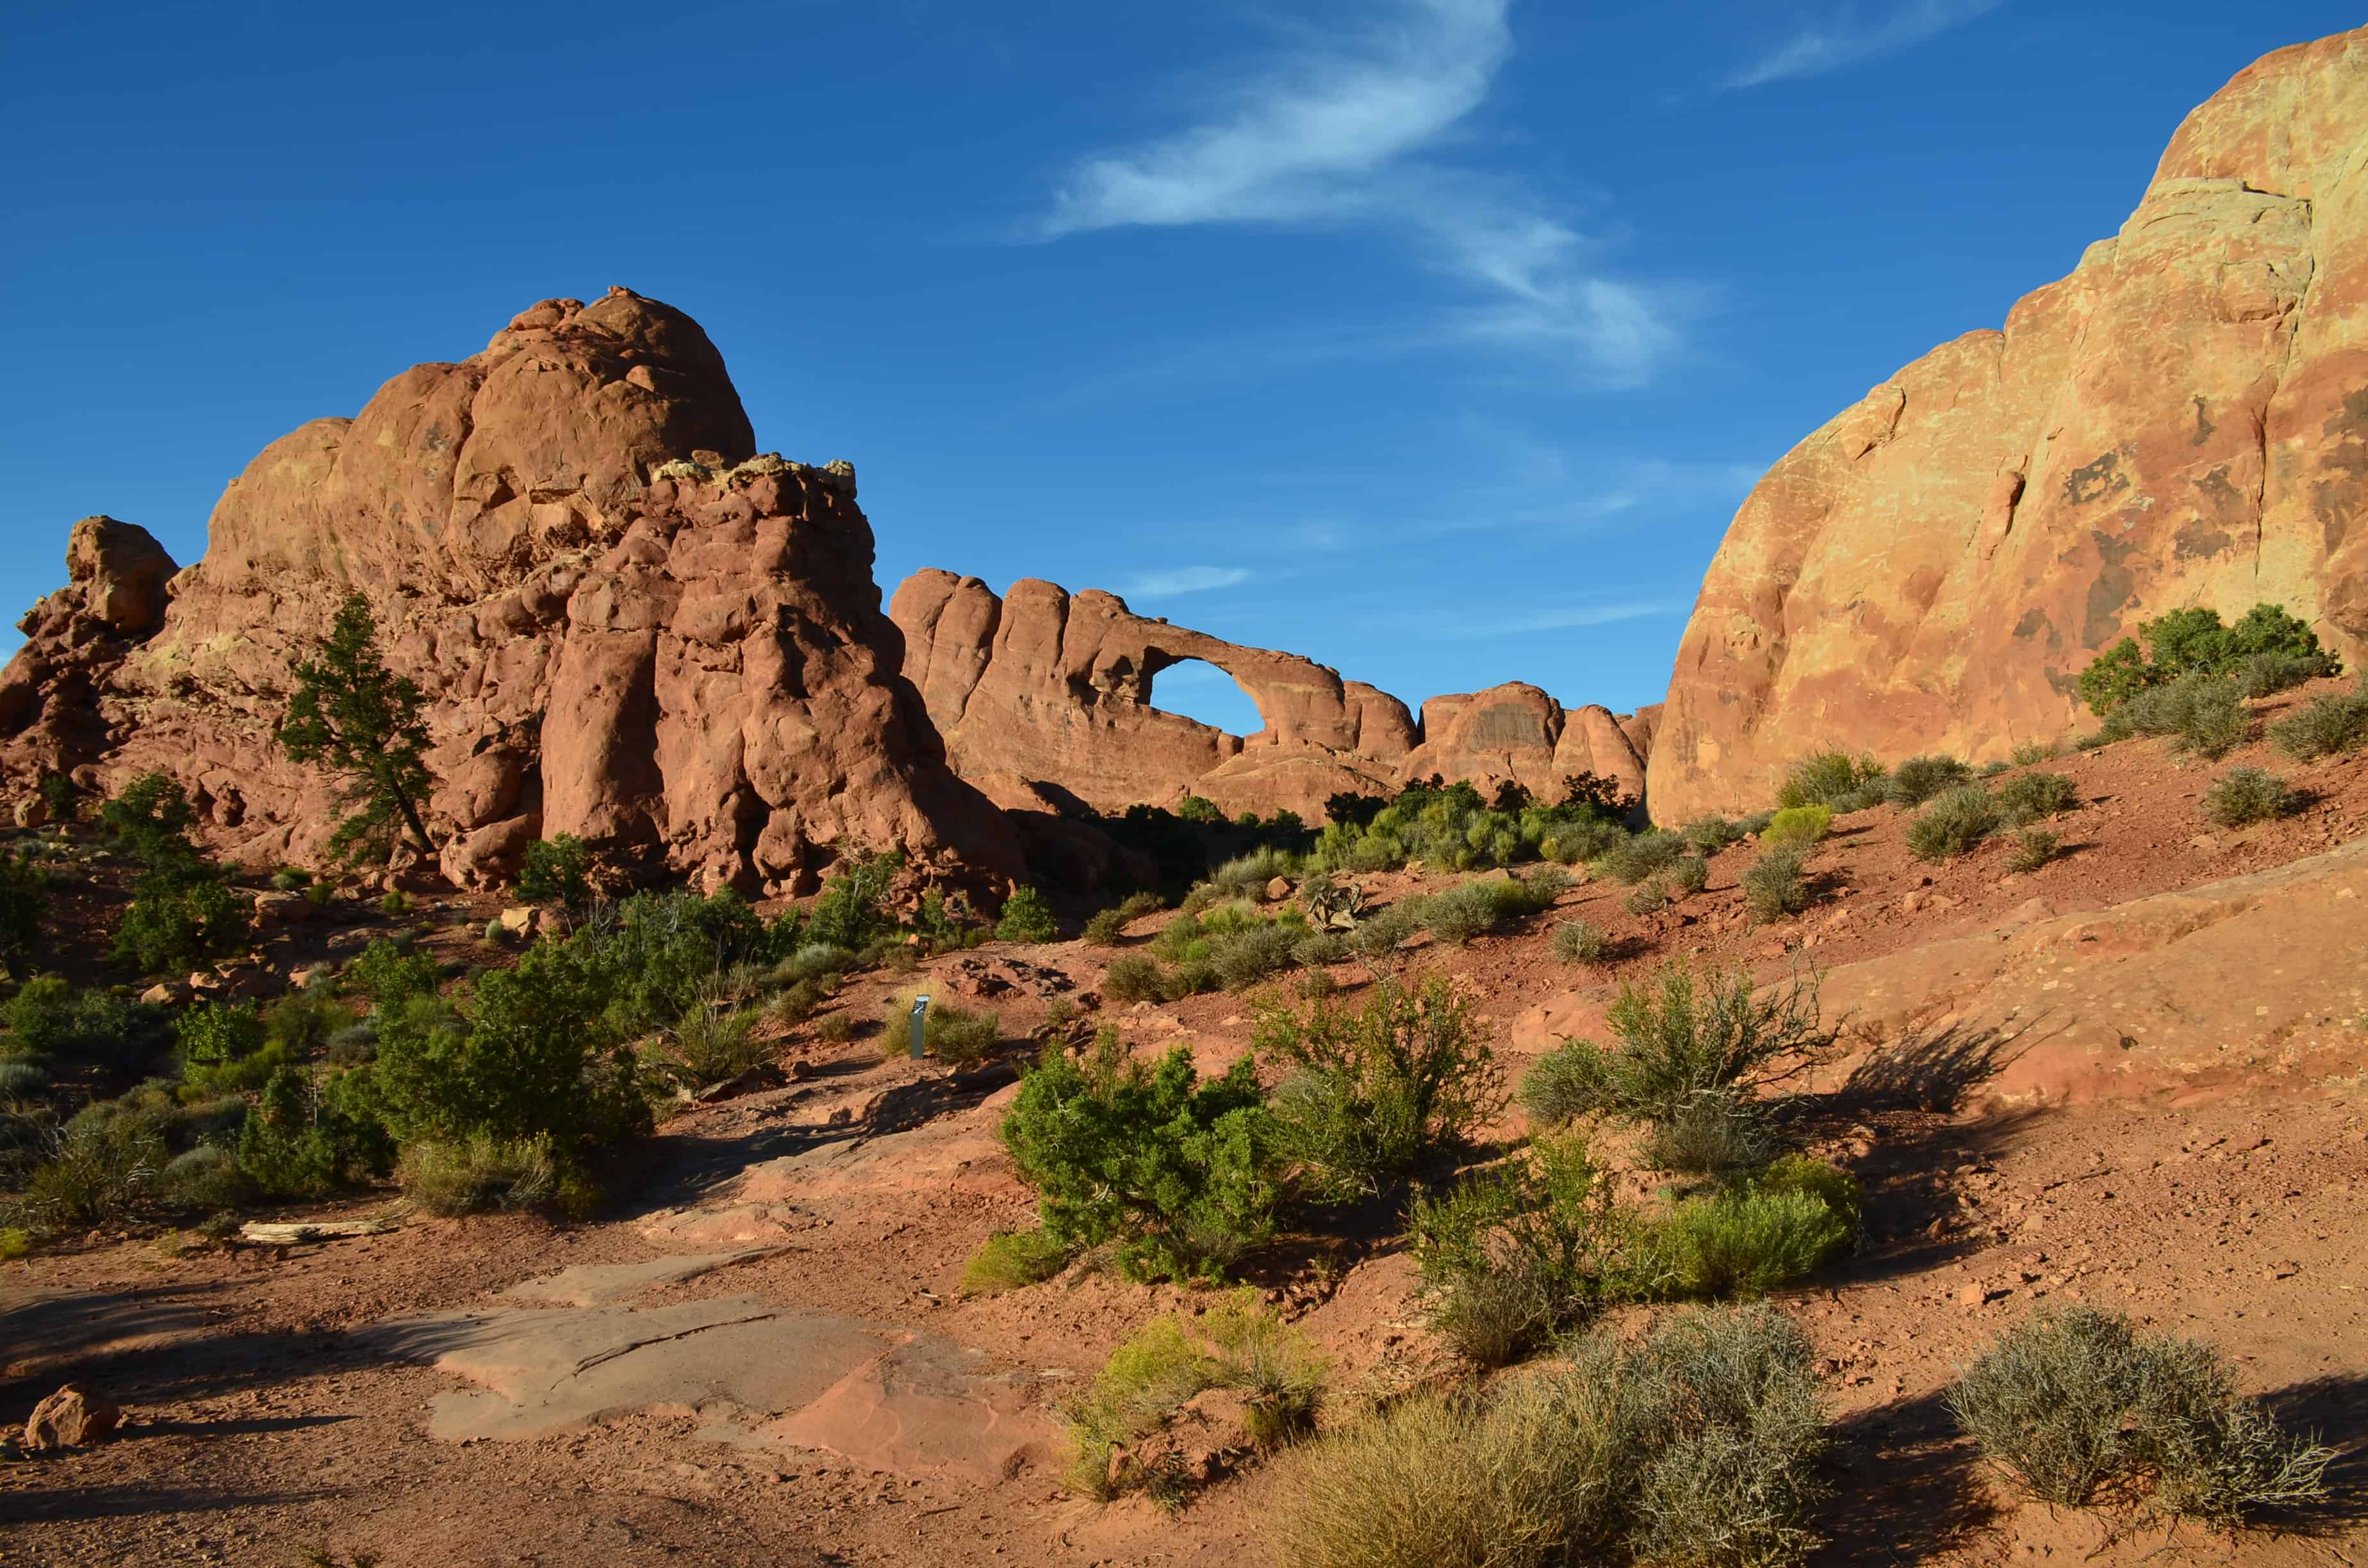 Skyline Arch at Arches National Park in Utah